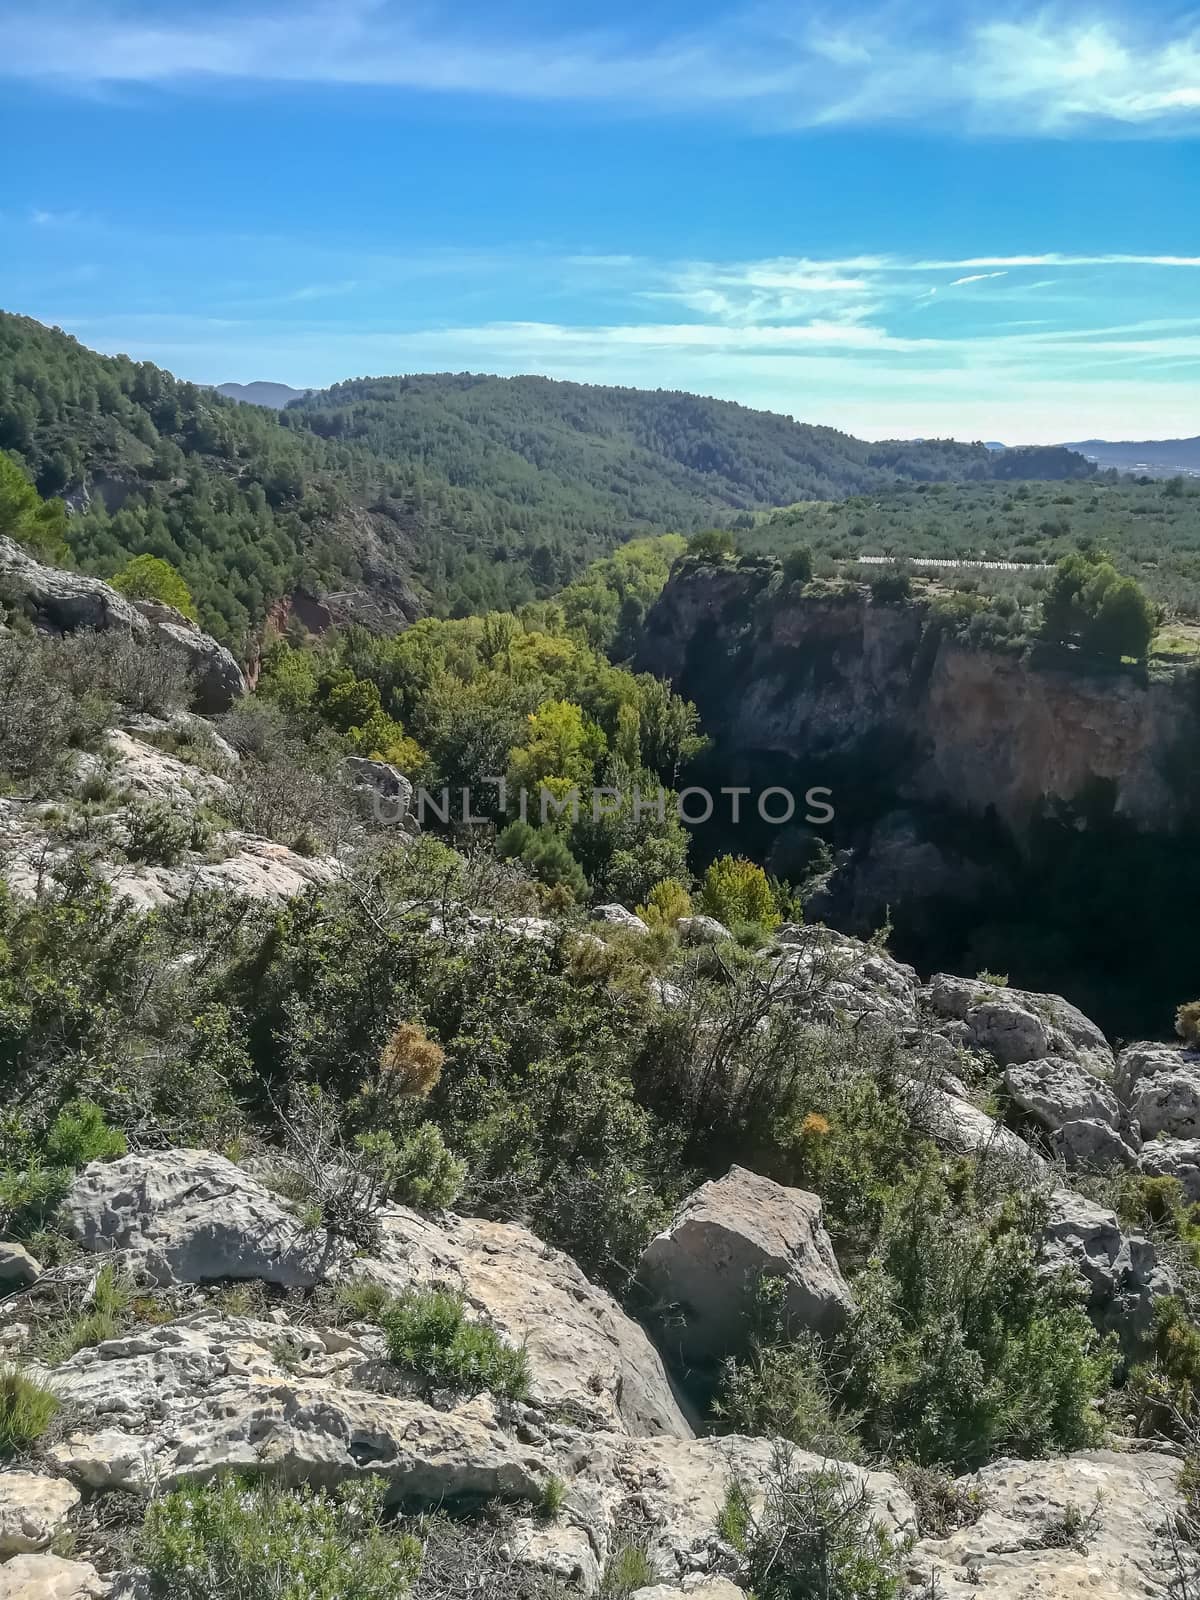 View of the canyon formed by the river Palancia by Barriolo82